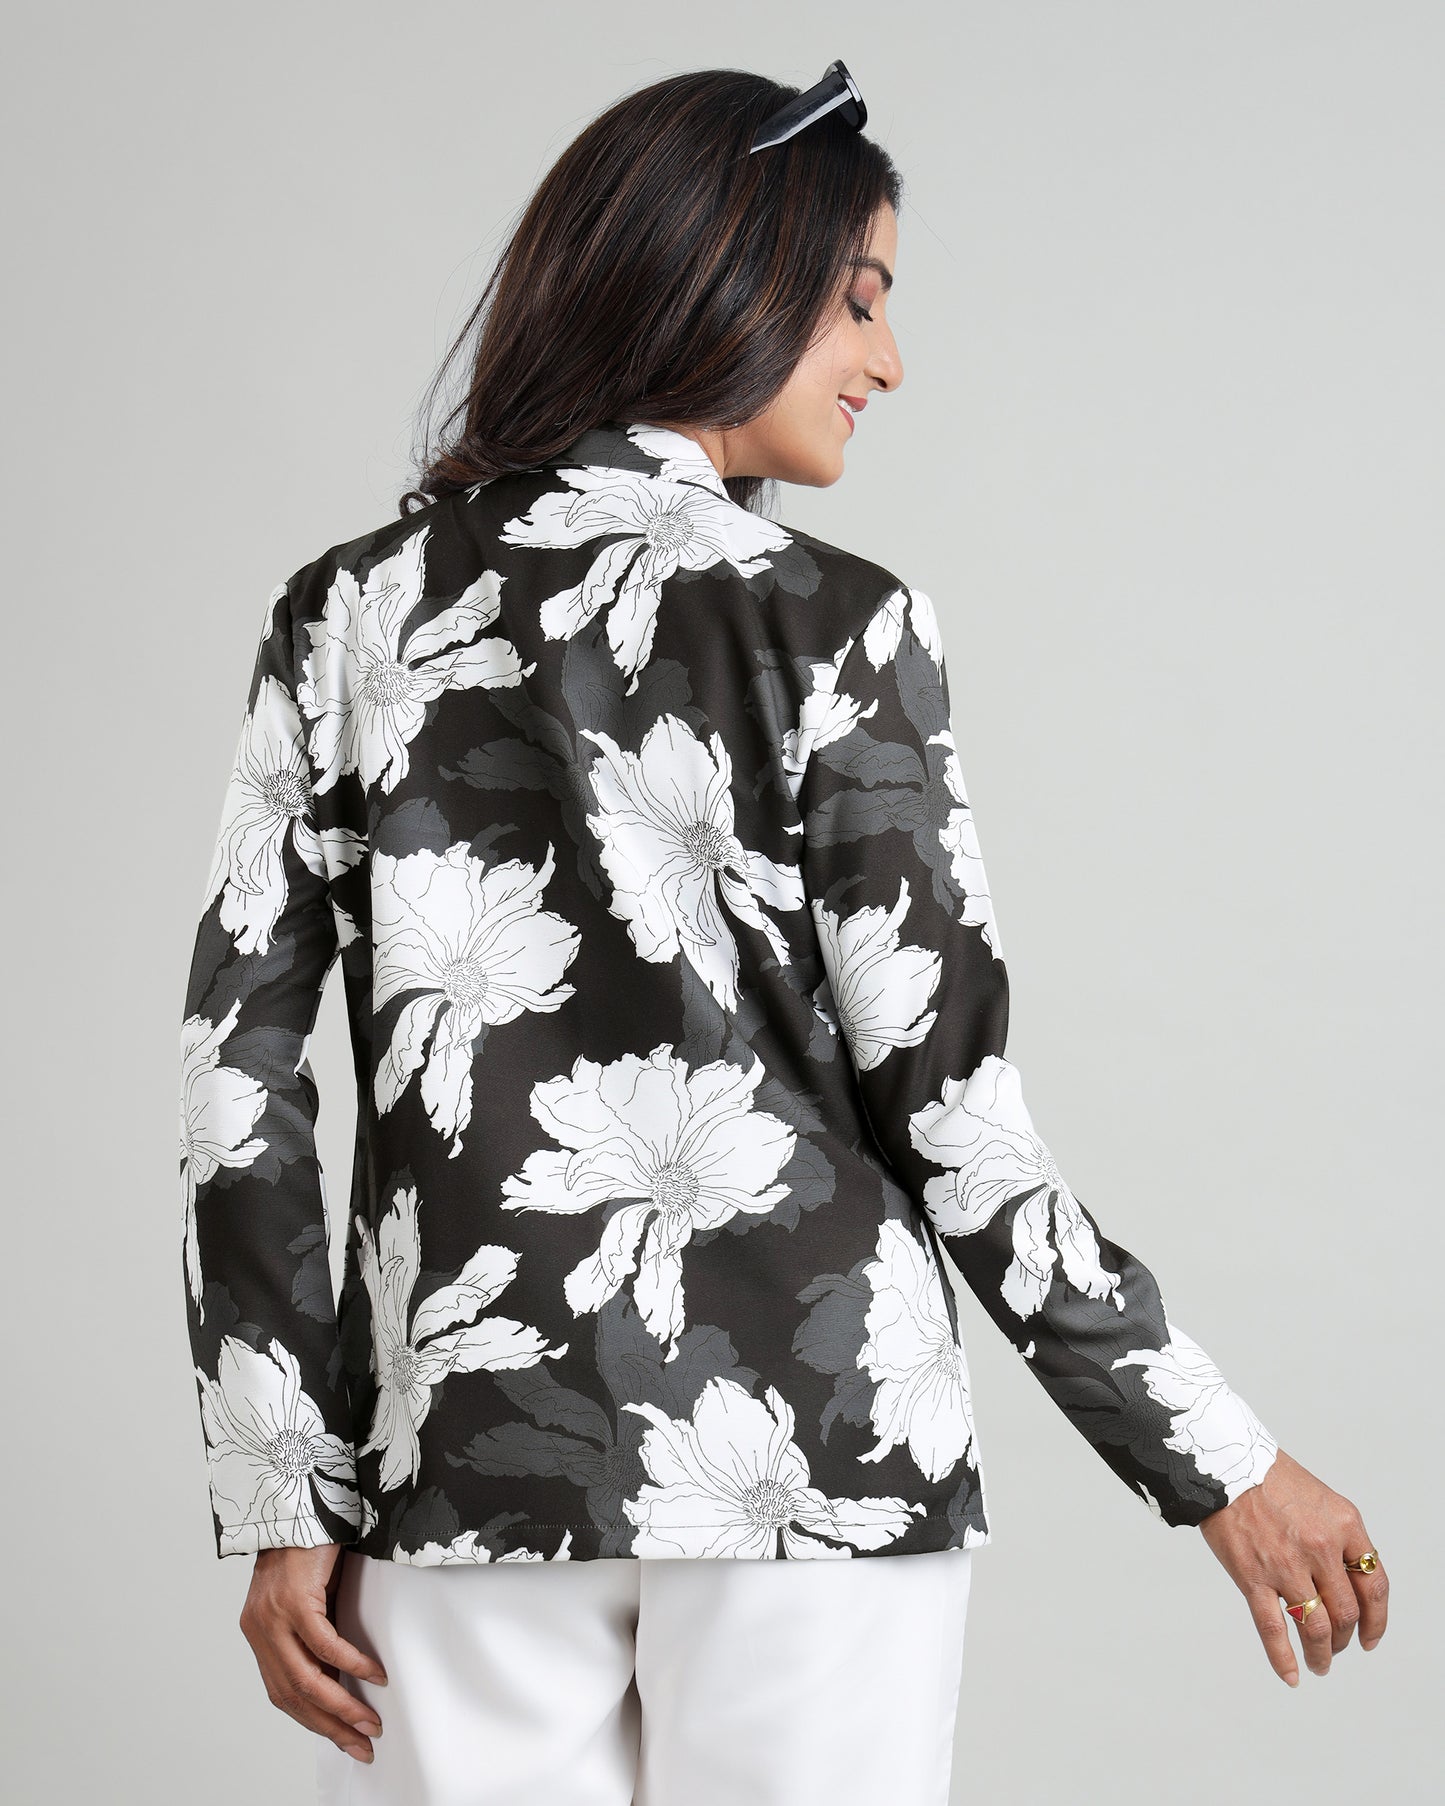 Classic With Twist: Black And White Floral Jacket